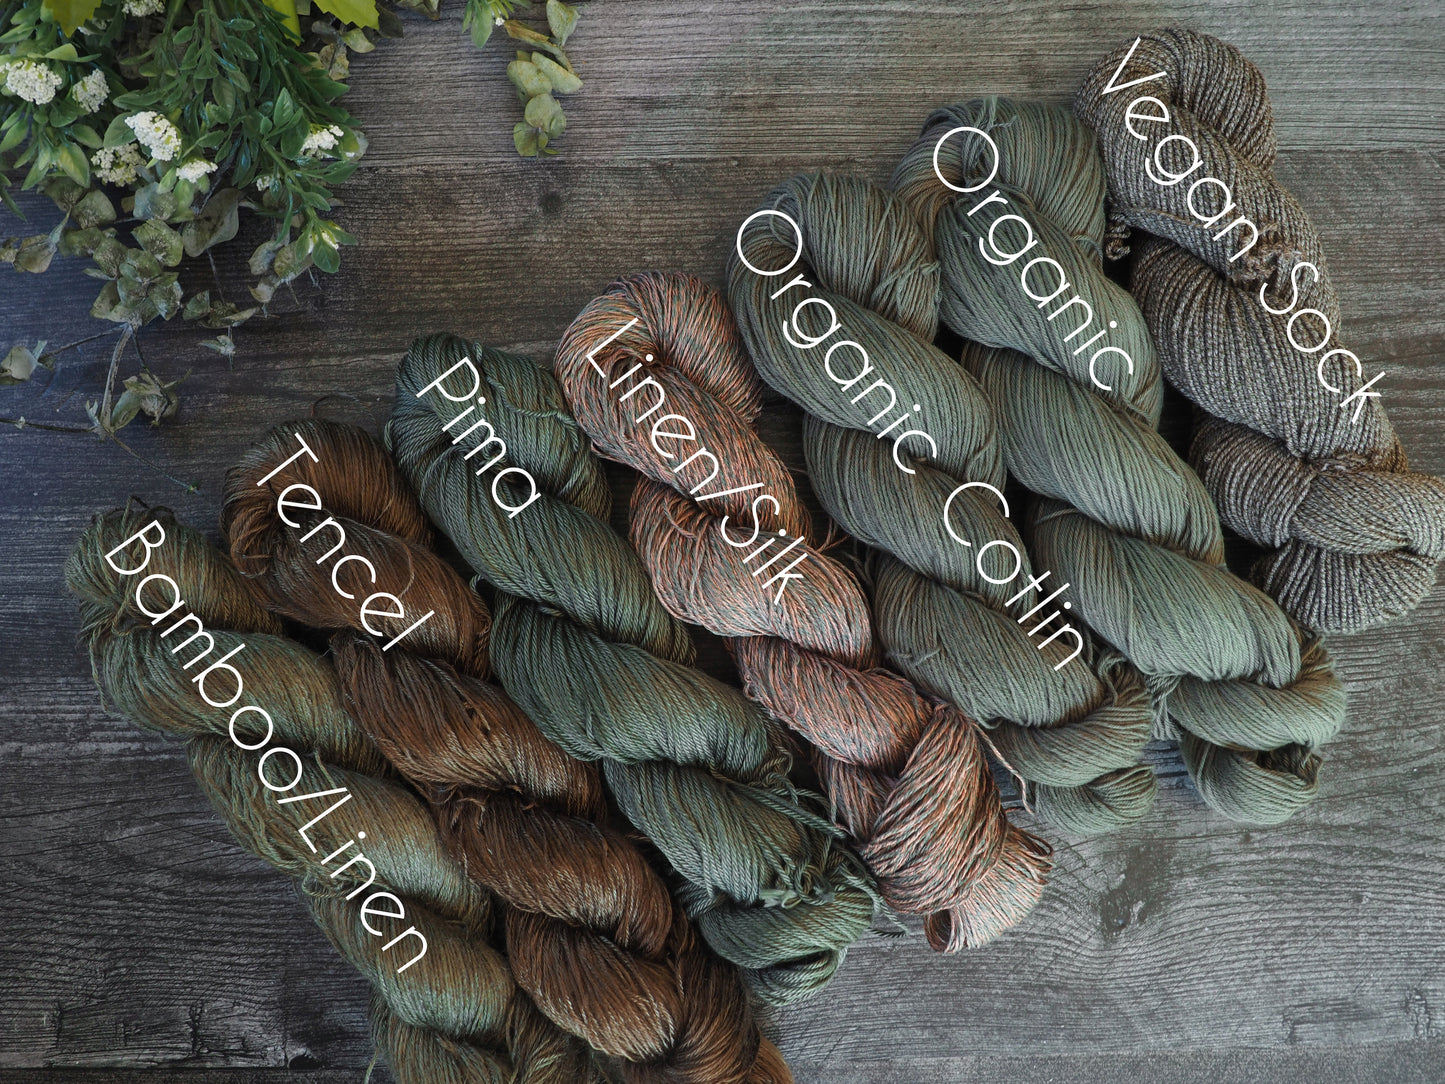 Mossy - Dyed to Order - *Please Allow 2-3 Weeks for Dyeing*